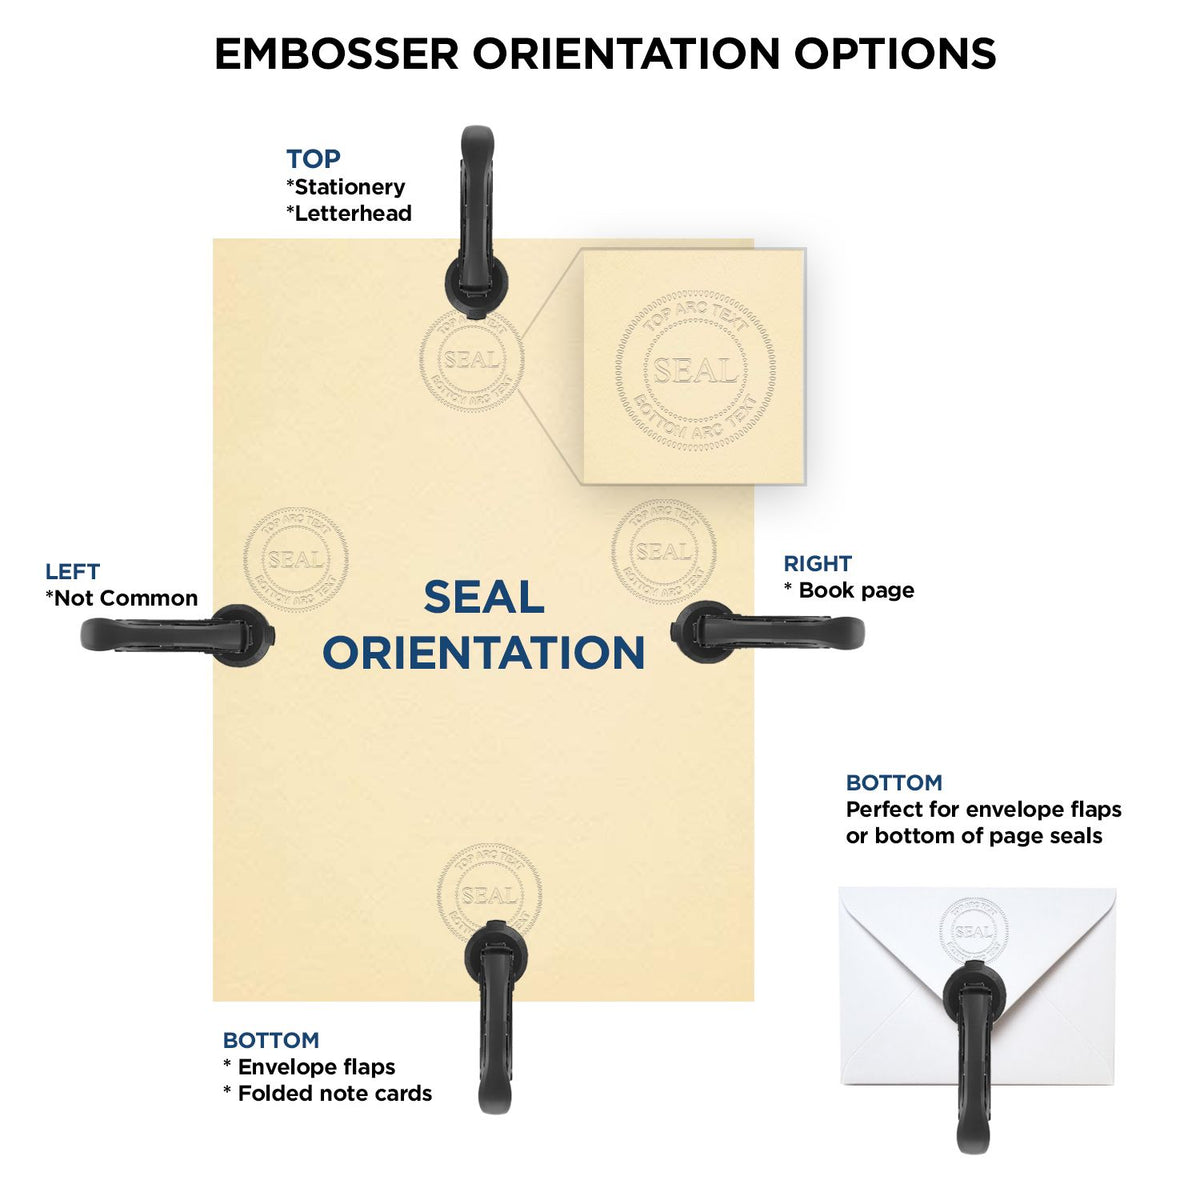 An infographic for the Handheld New Hampshire Professional Geologist Embosser showing embosser orientation, this is showing examples of a top, bottom, right and left insert.